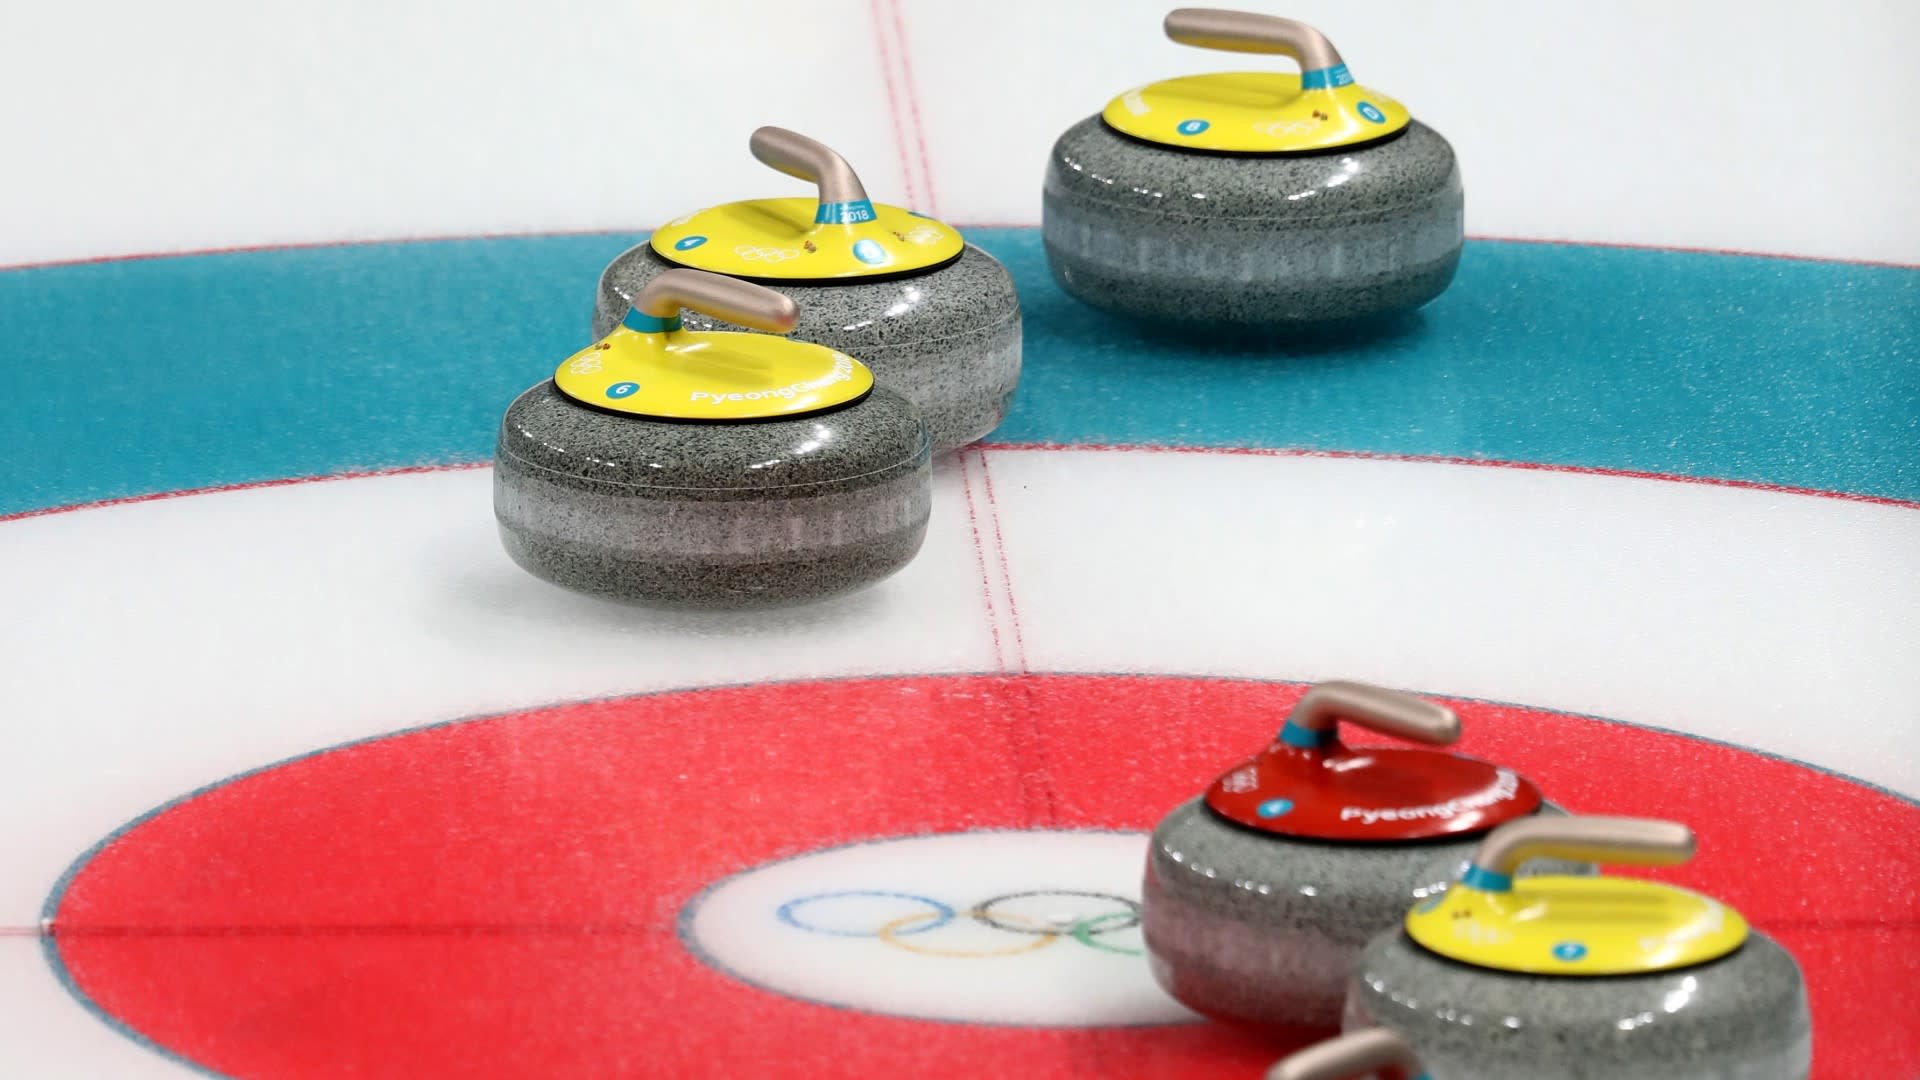 Curling at Beijing 2022 Full schedule and how to watch at the Olympic Winter Games